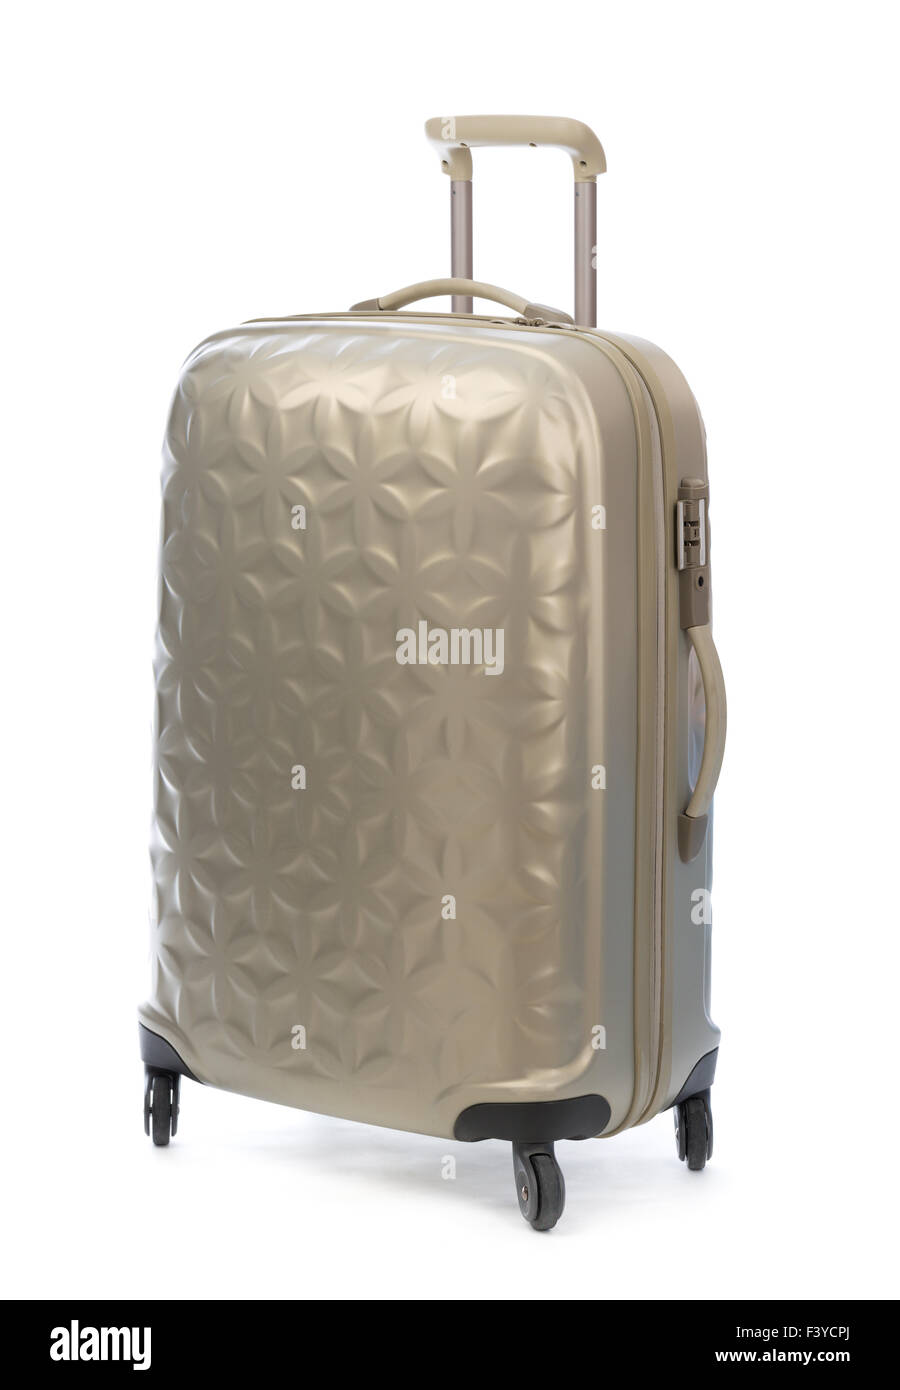 Beige plastic suitcase on wheels for travel. Stock Photo